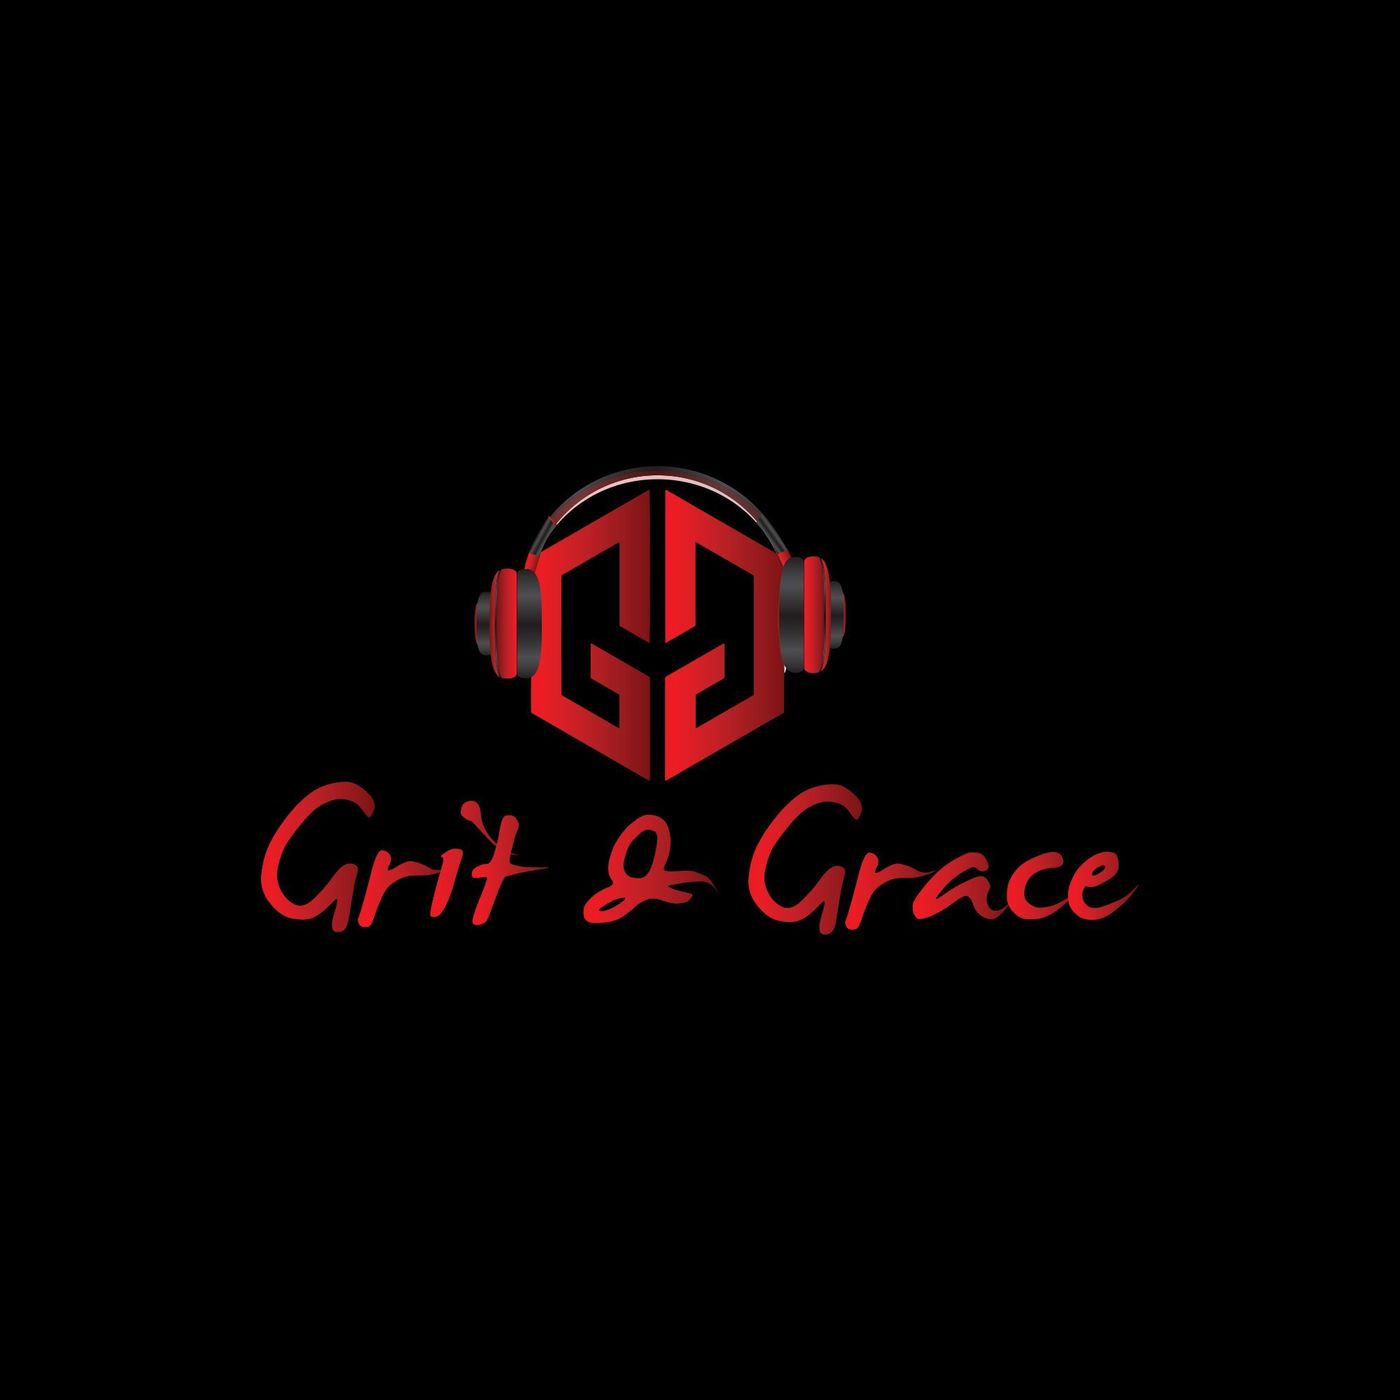 Grit and Grace: How to Find Your Divine Mission